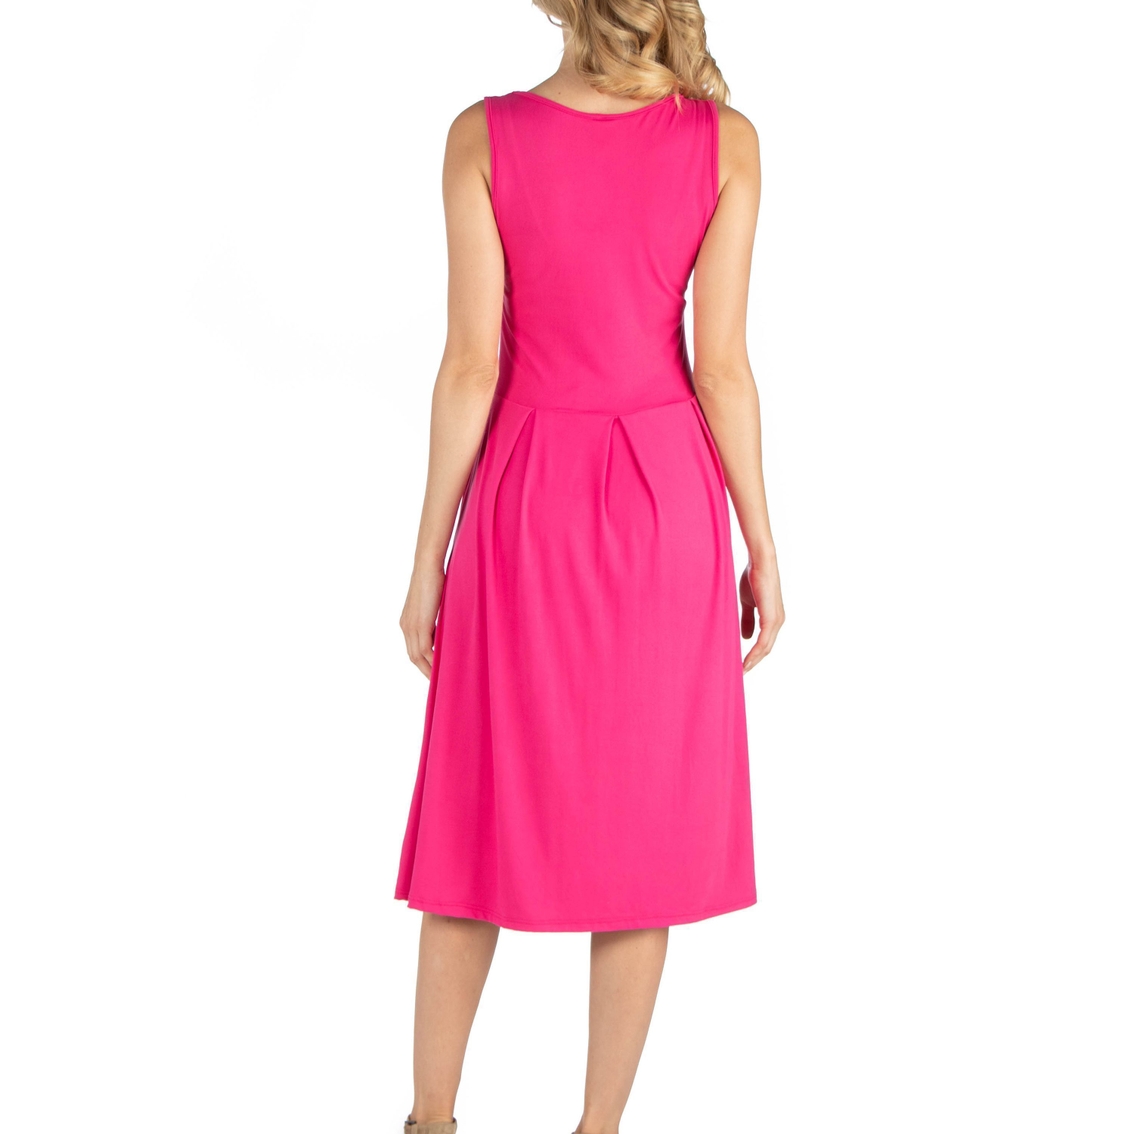 24seven Comfort Apparel Fit and Flare Sleeveless Maternity Midi Dress with Pockets - Image 3 of 4